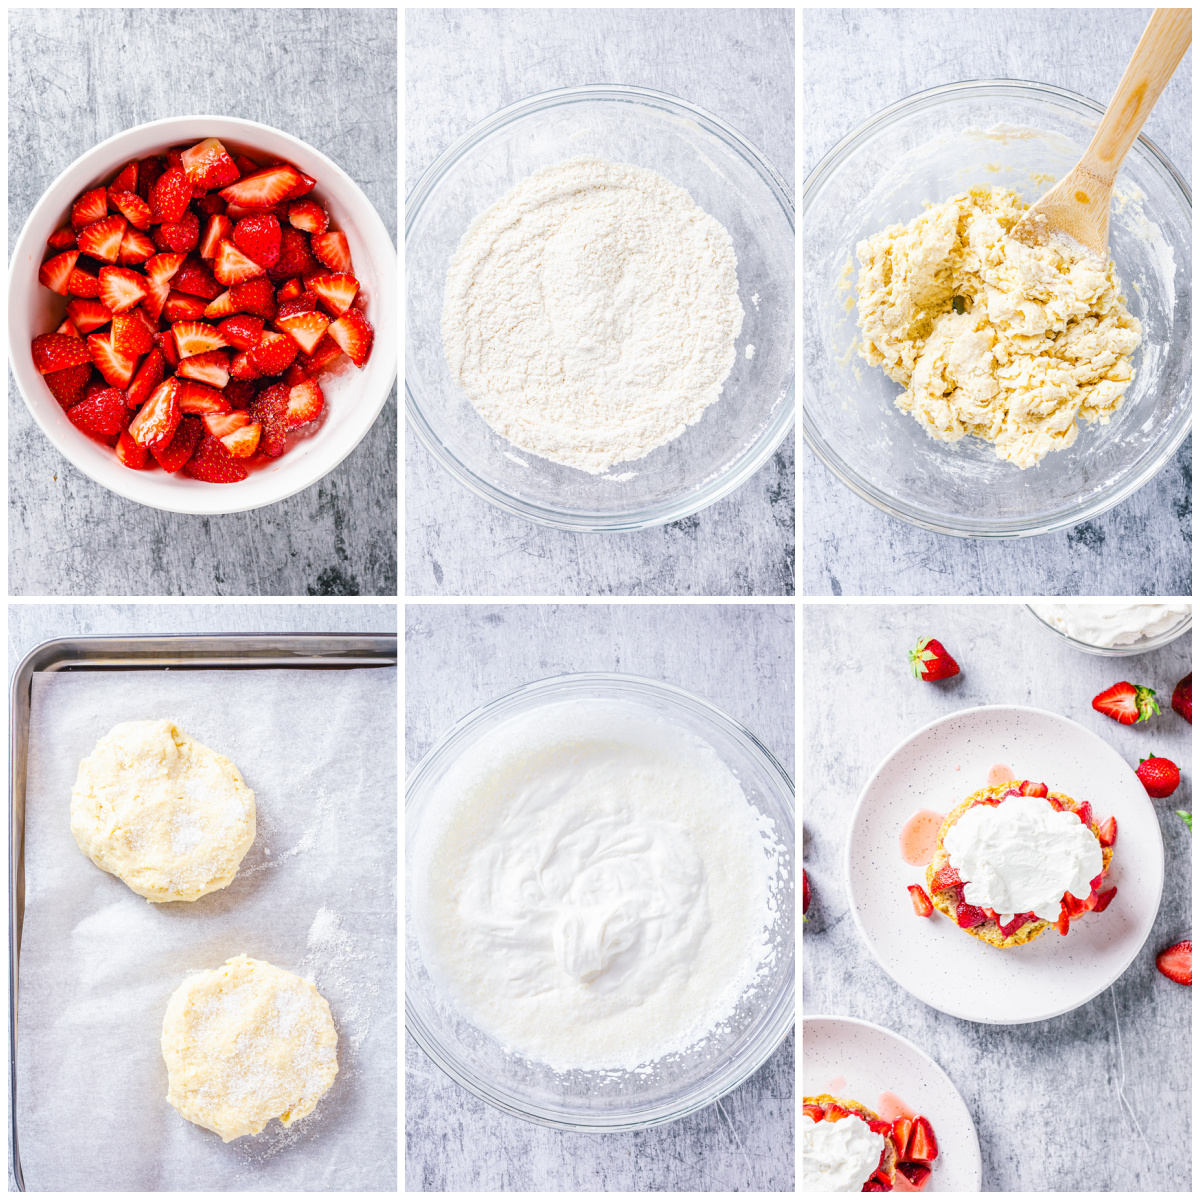 Step by step photos on how to make a Strawberry Shortcake Recipe